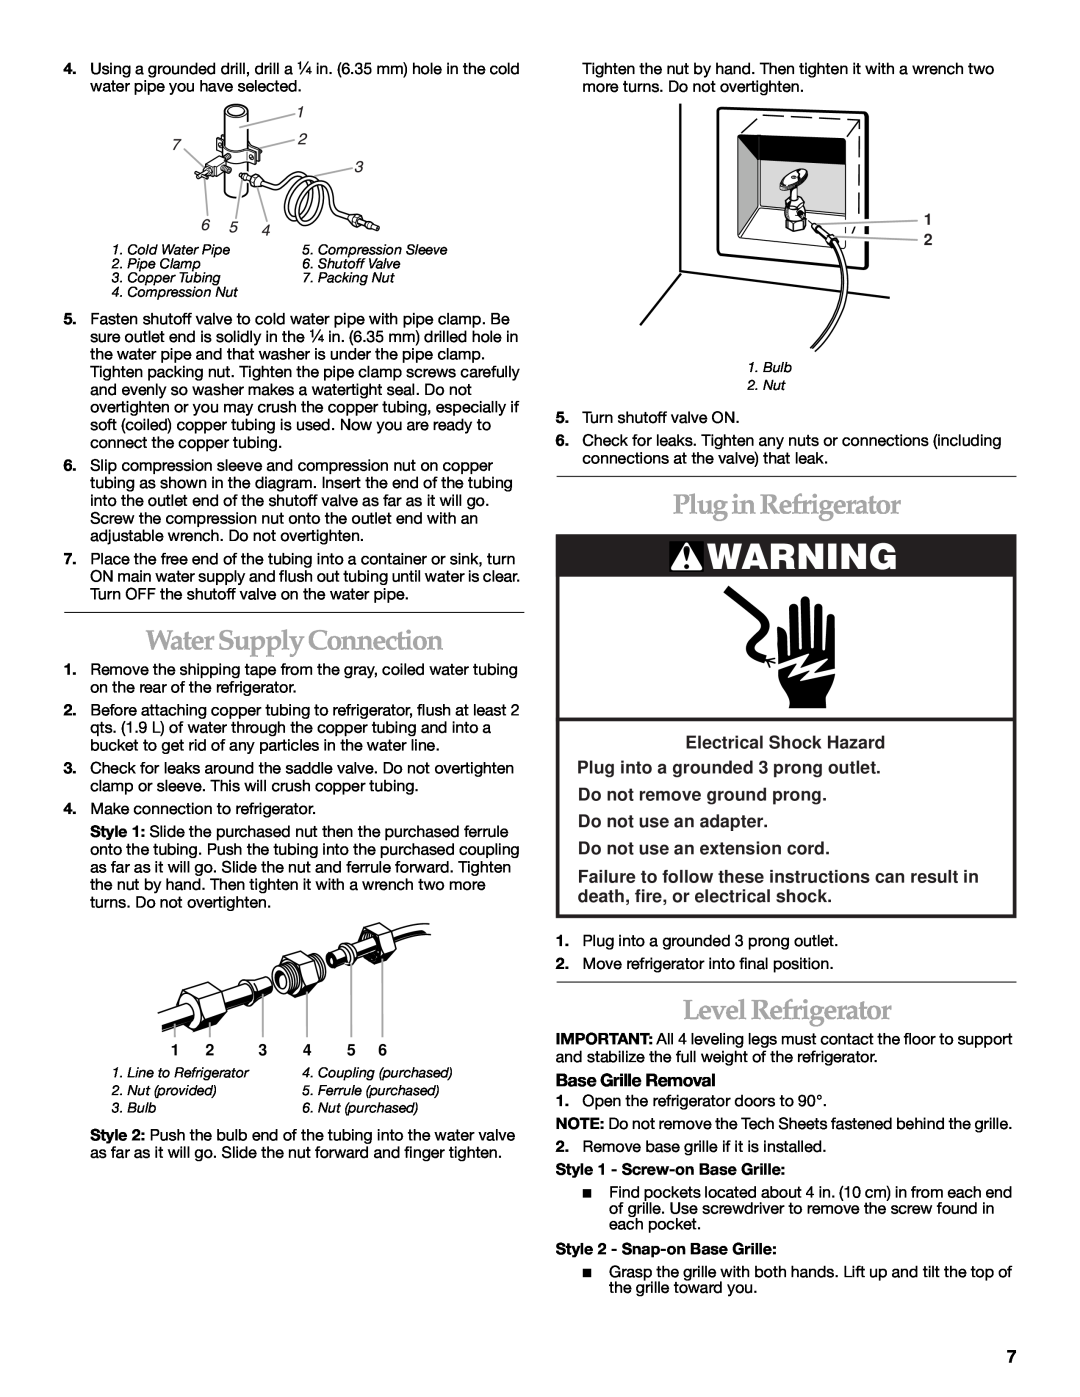 KitchenAid 2221514A Water Supply Connection, Plug in Refrigerator, Level Refrigerator, Base Grille Removal 